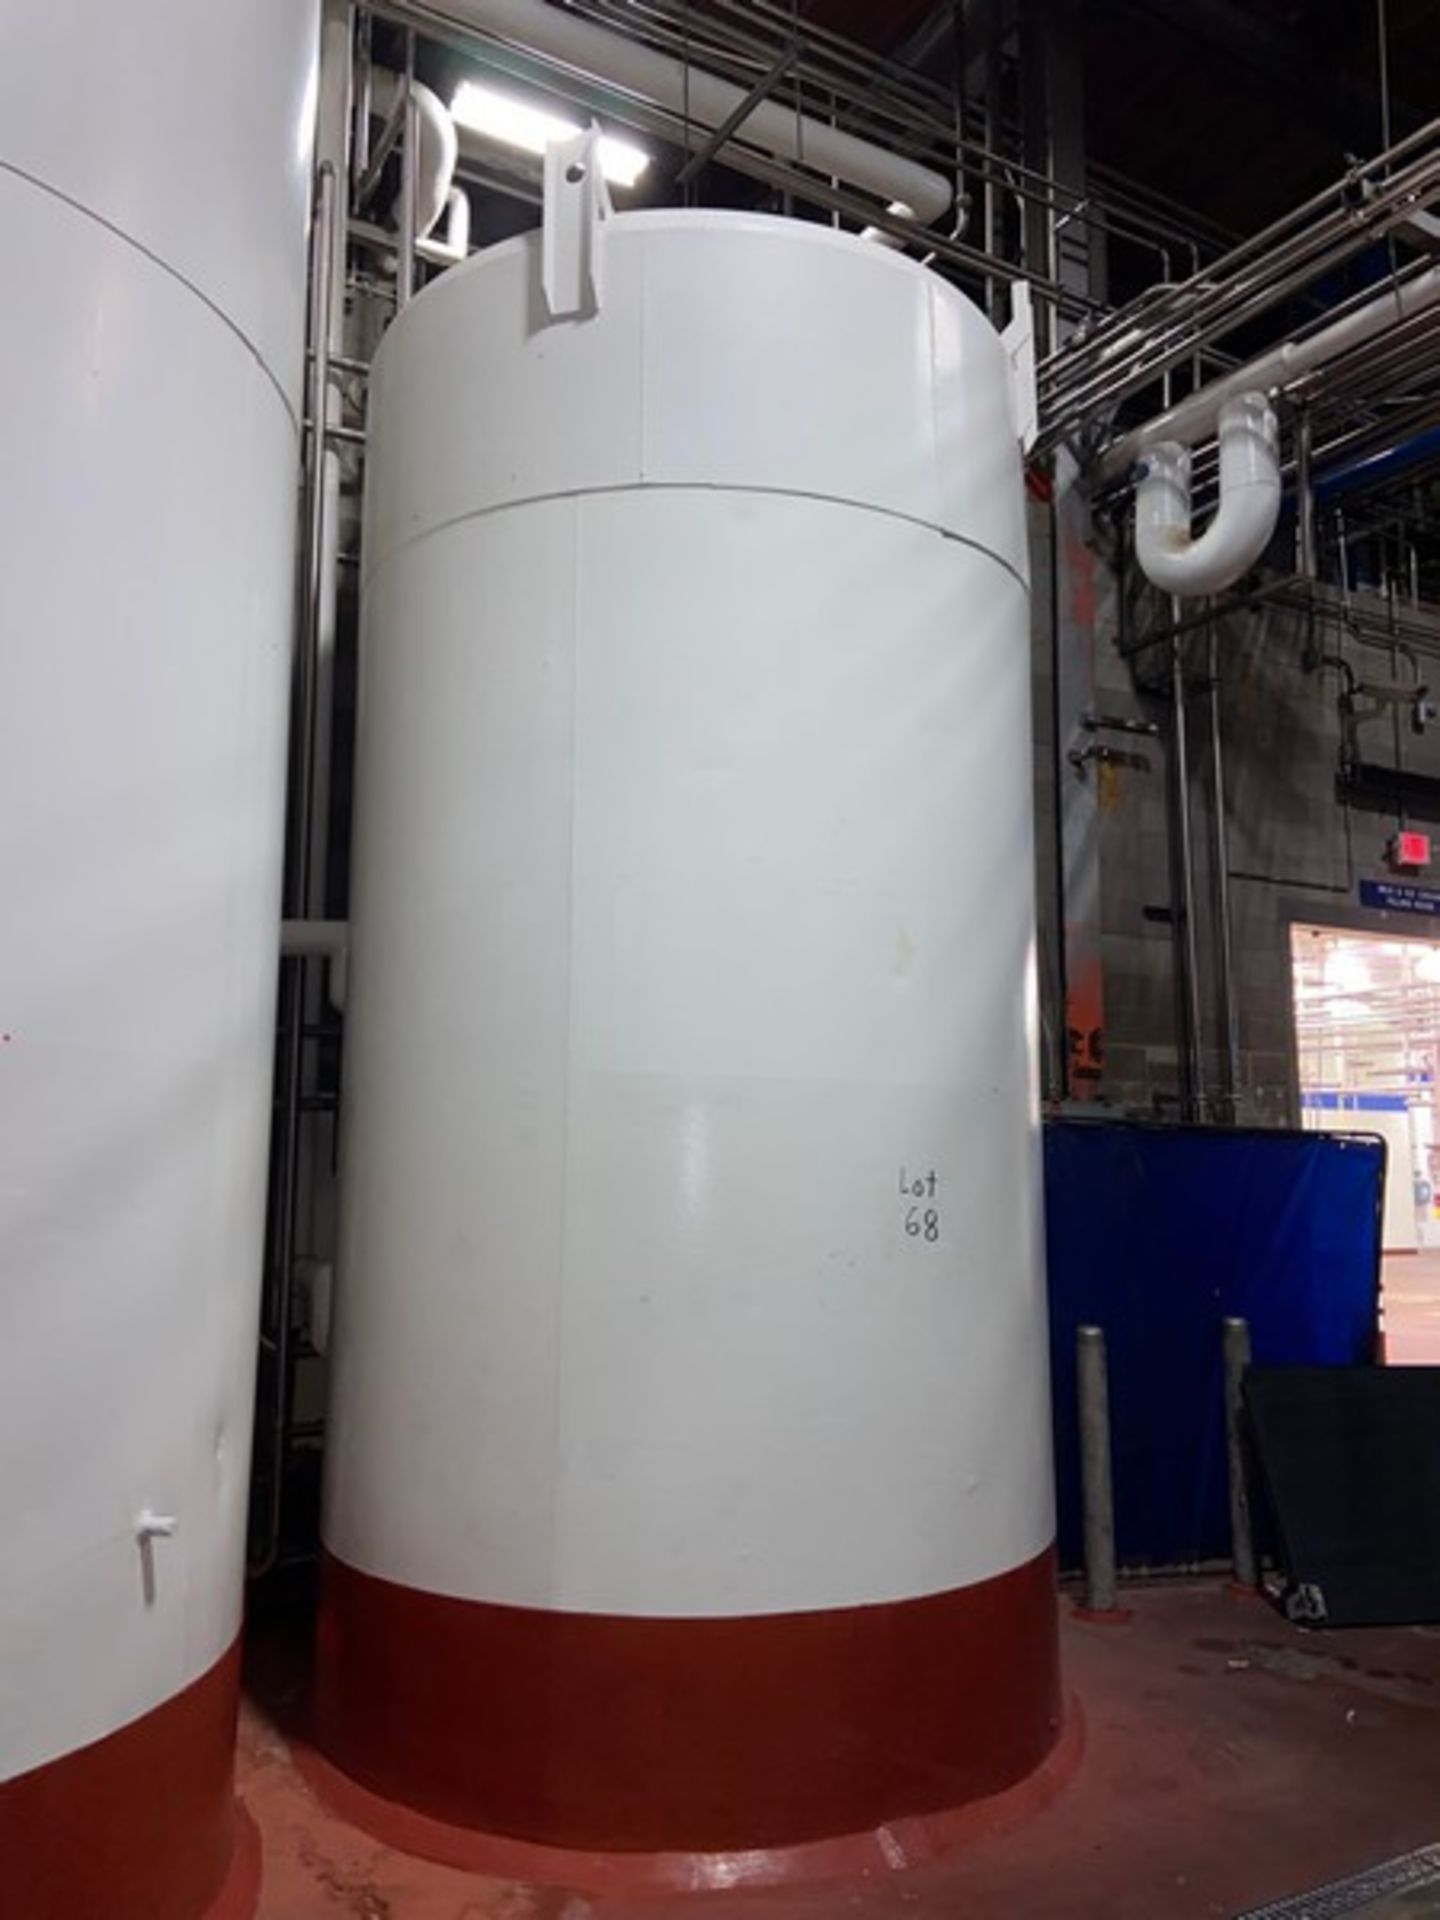 St. Regis 3,000 Gal. Jacketed S/S Silo, S/N 3913, with Horizontal Agitation with S/S Clad Motor,